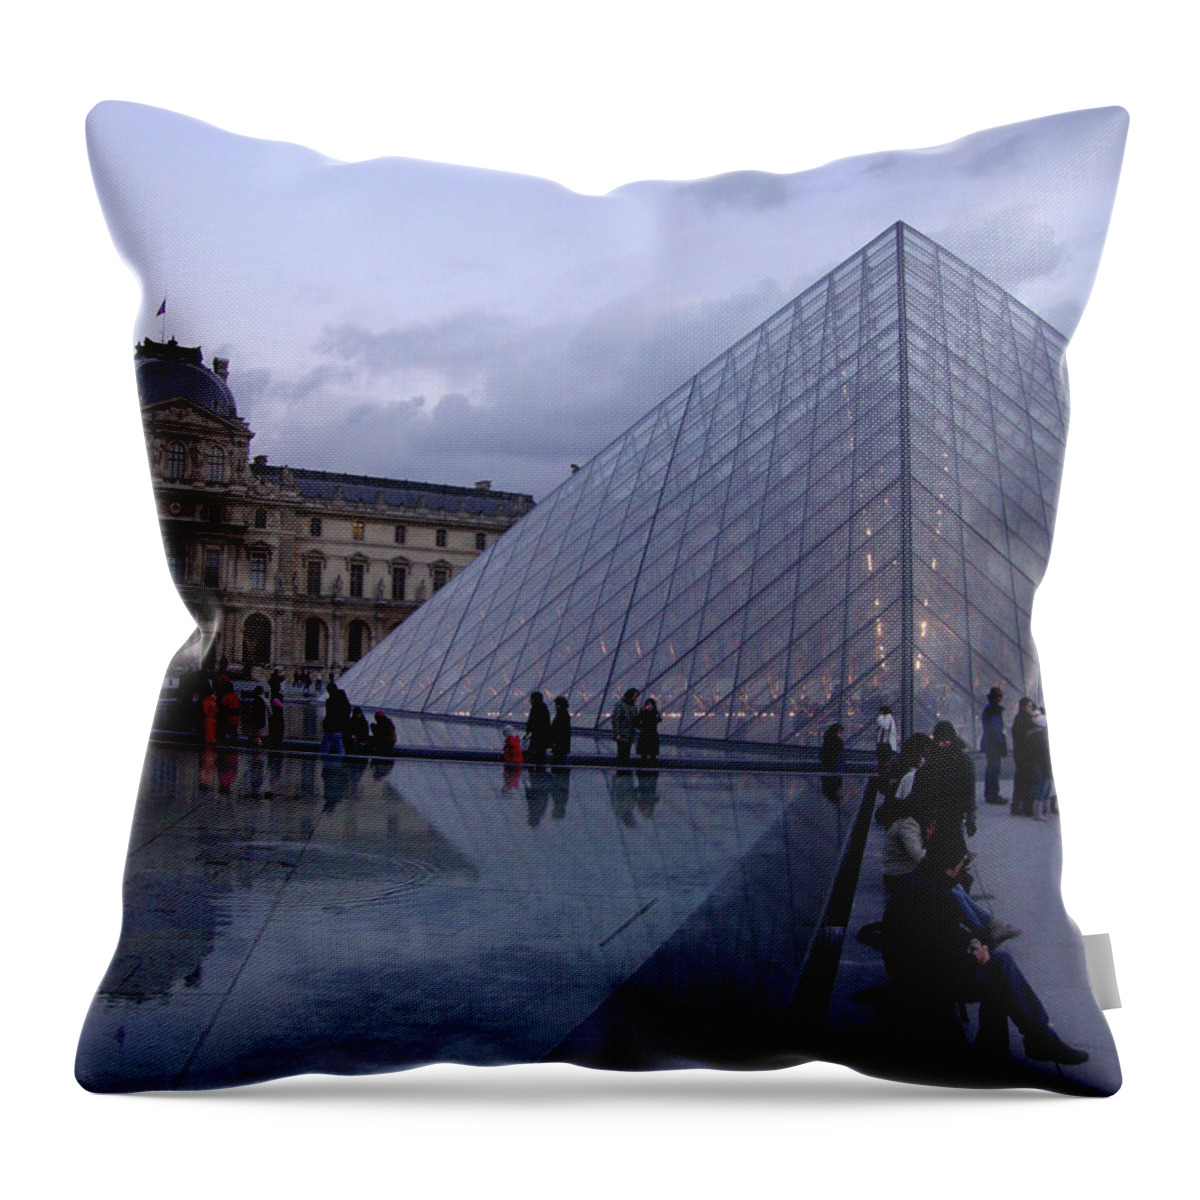 France Throw Pillow featuring the photograph The Louvre by Roxy Rich